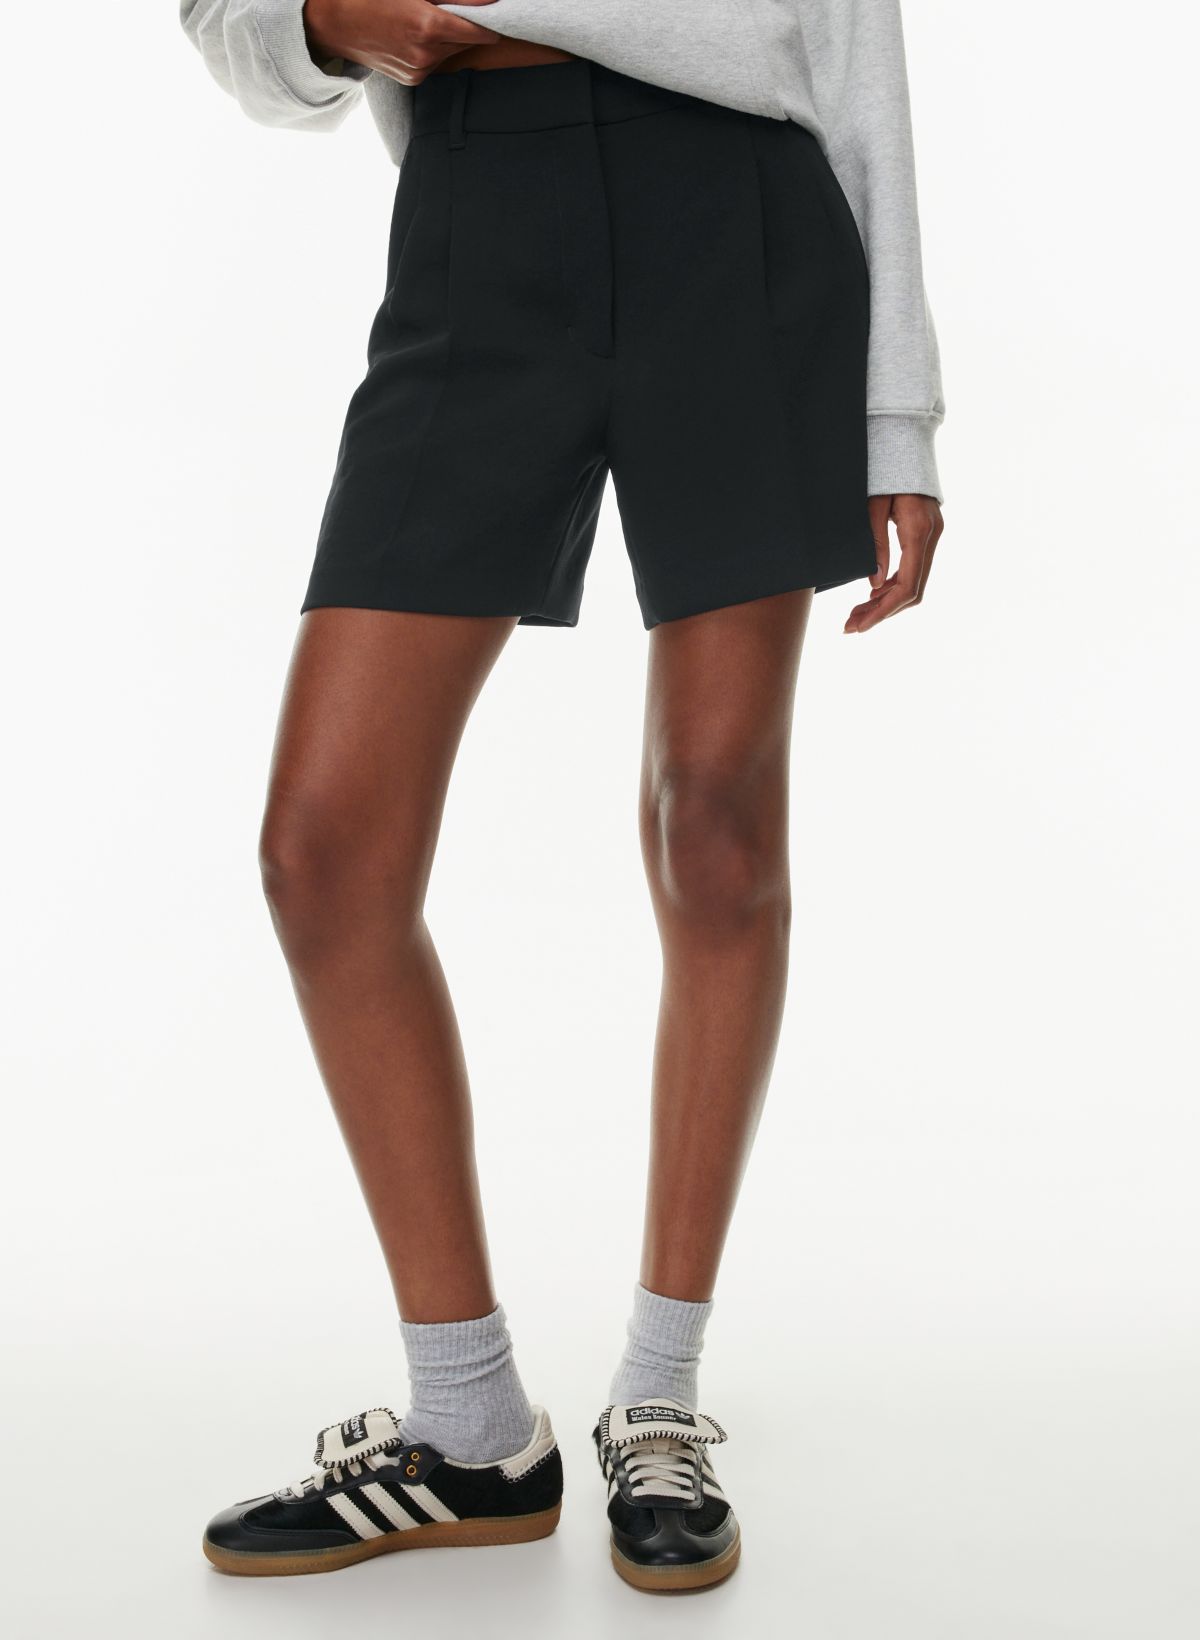 Low Rise Belted Detail Booty Shorts In Black